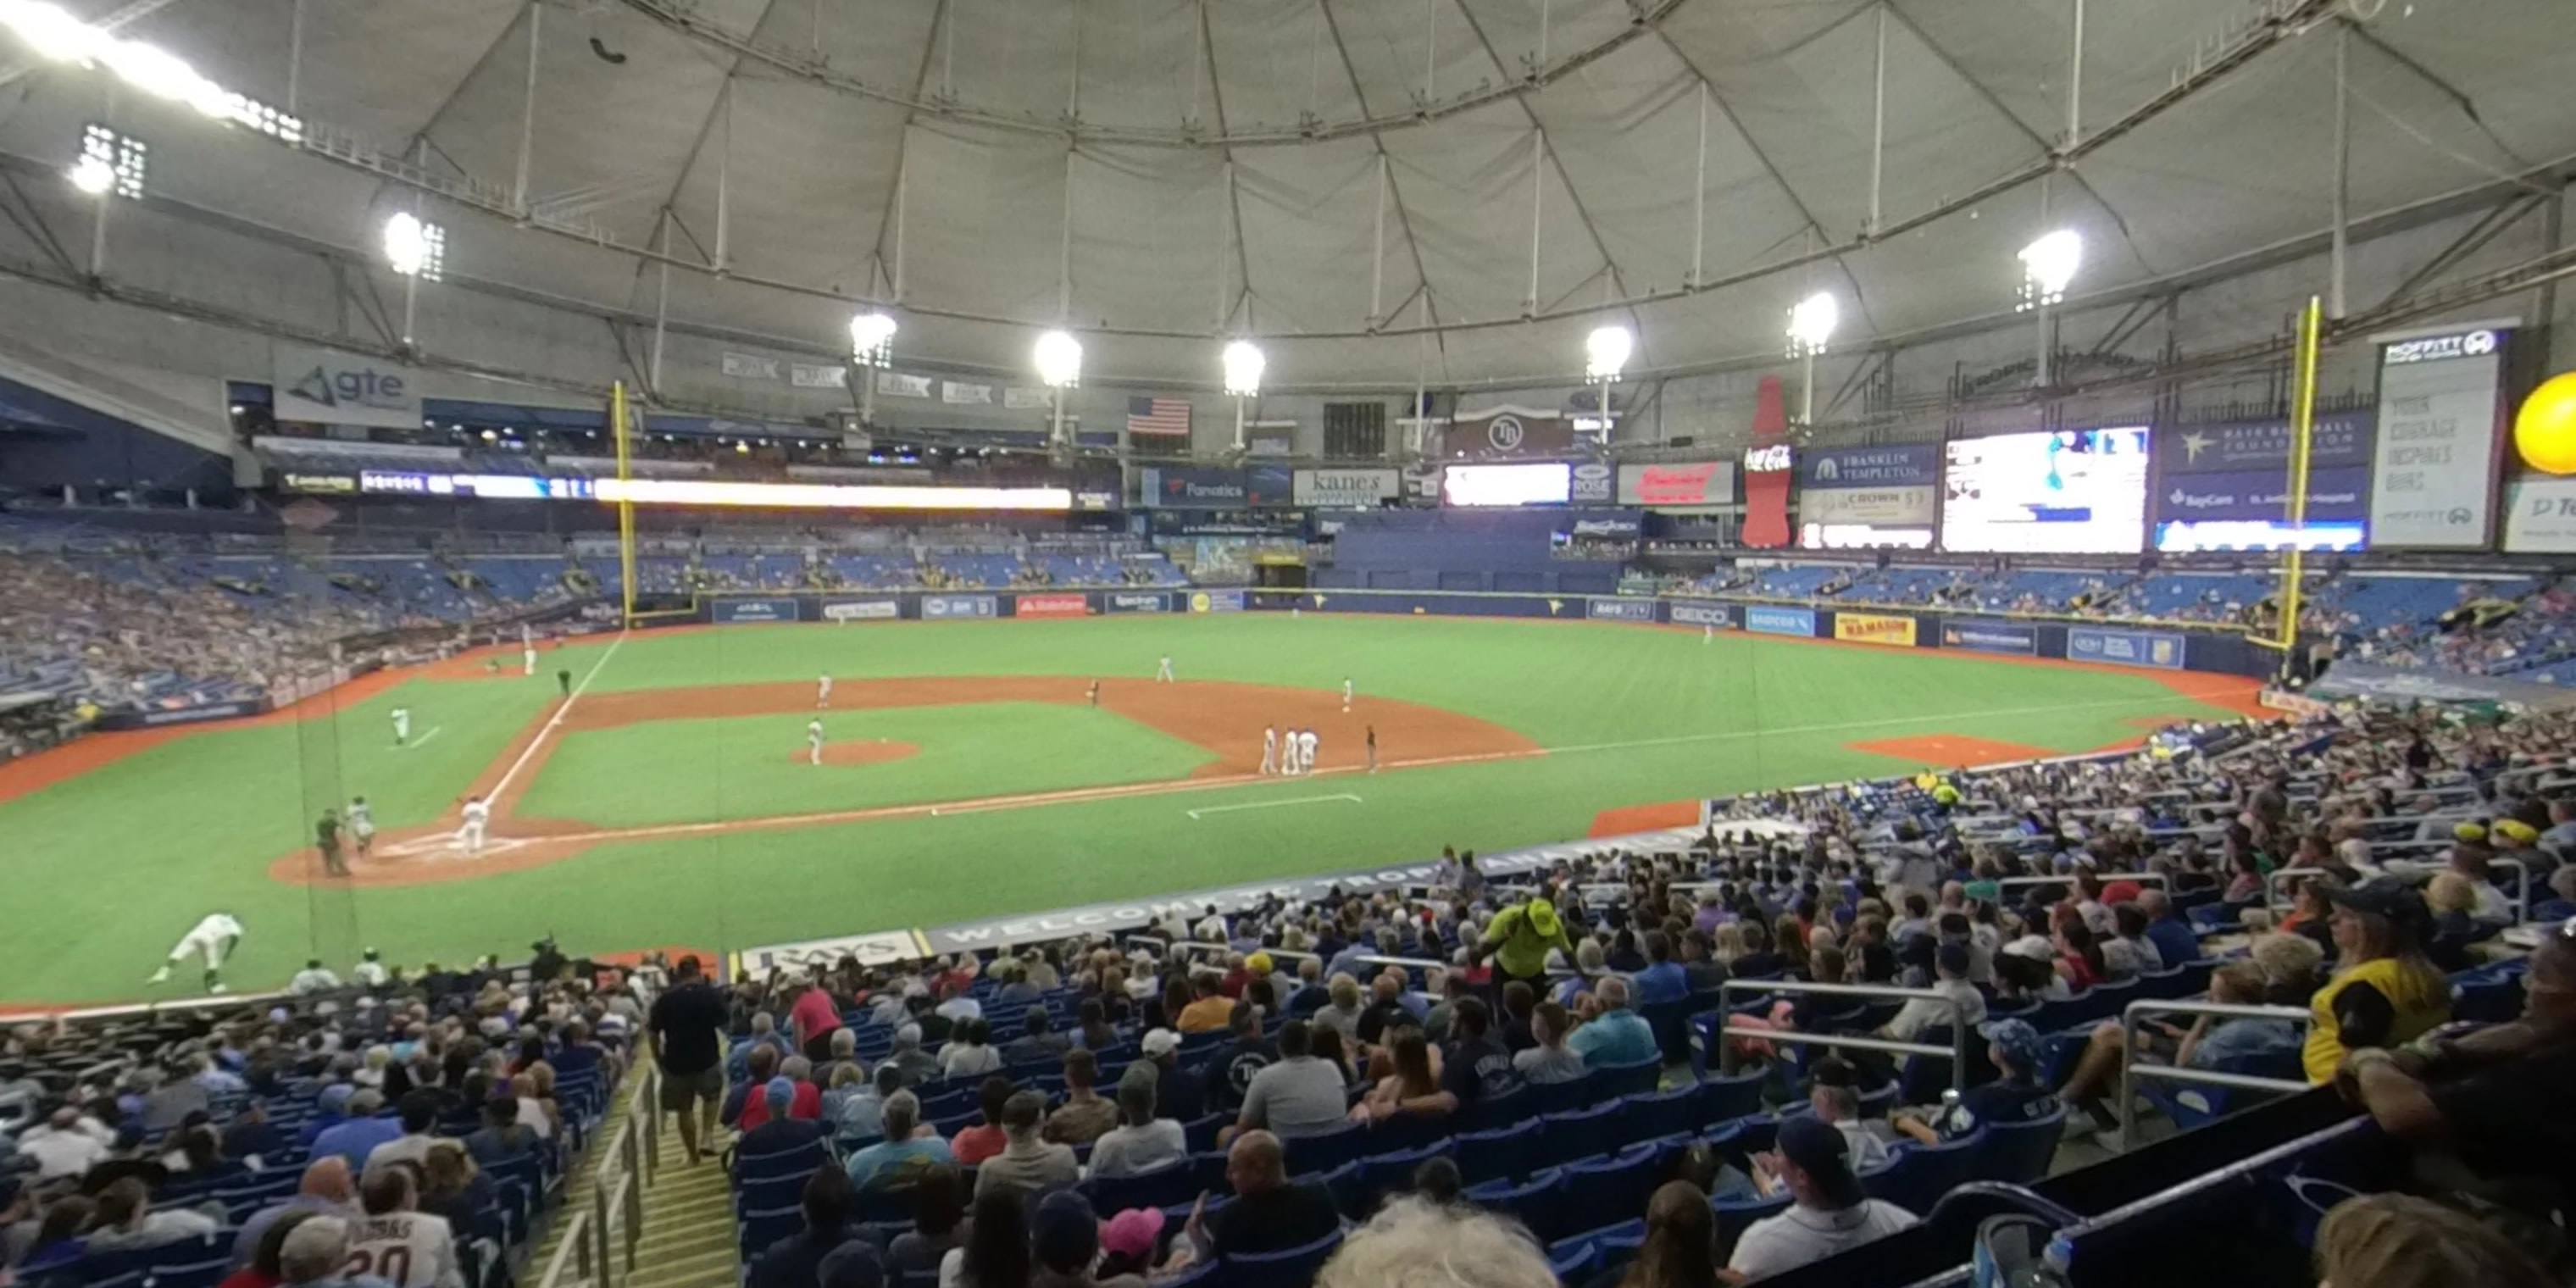 section 112 panoramic seat view  for baseball - tropicana field